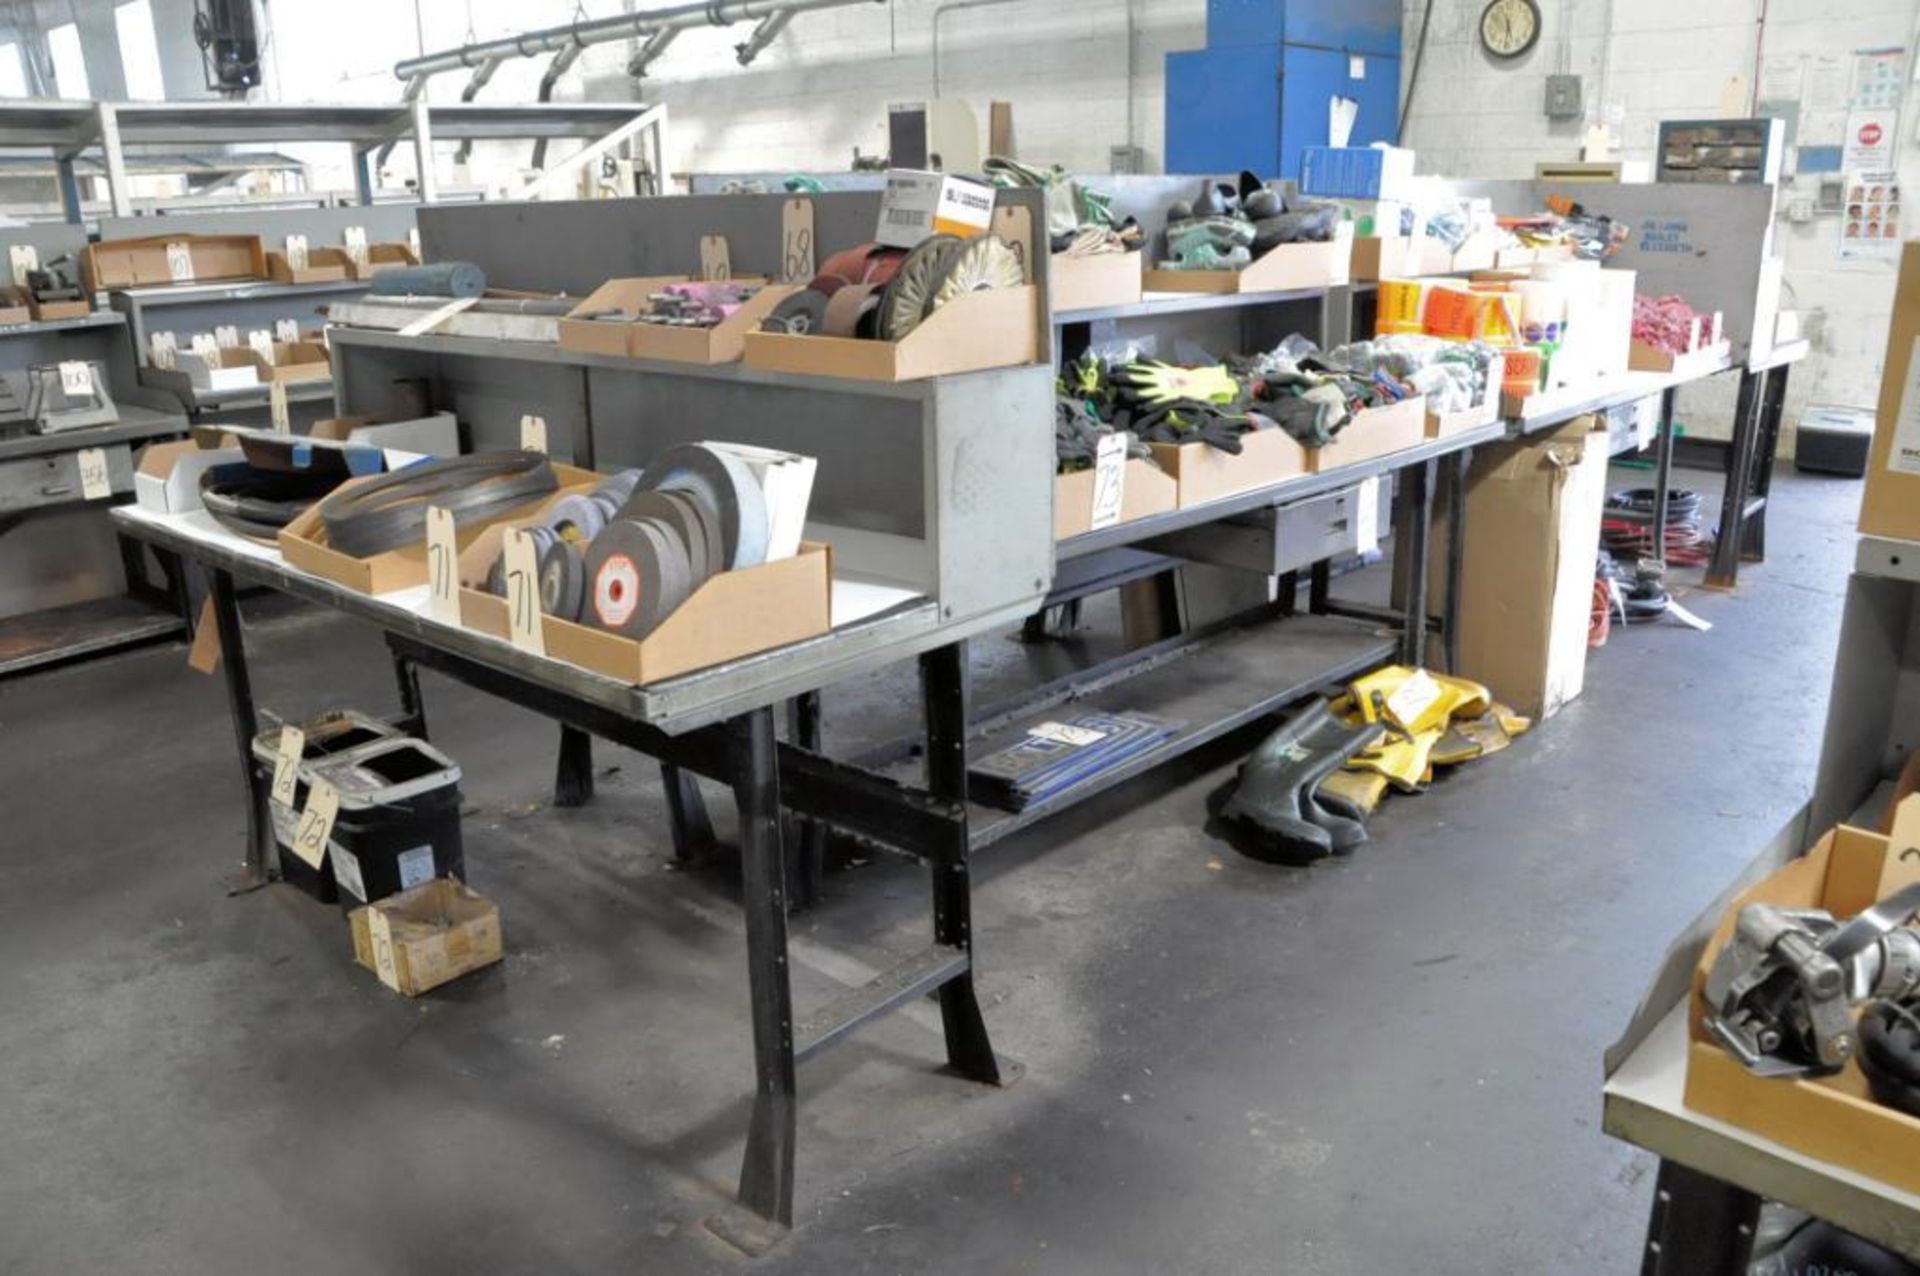 Lot-(6) Standard Work Benches, (Contents Not Included), (Not to Be Removed Until Empty) - Image 2 of 3